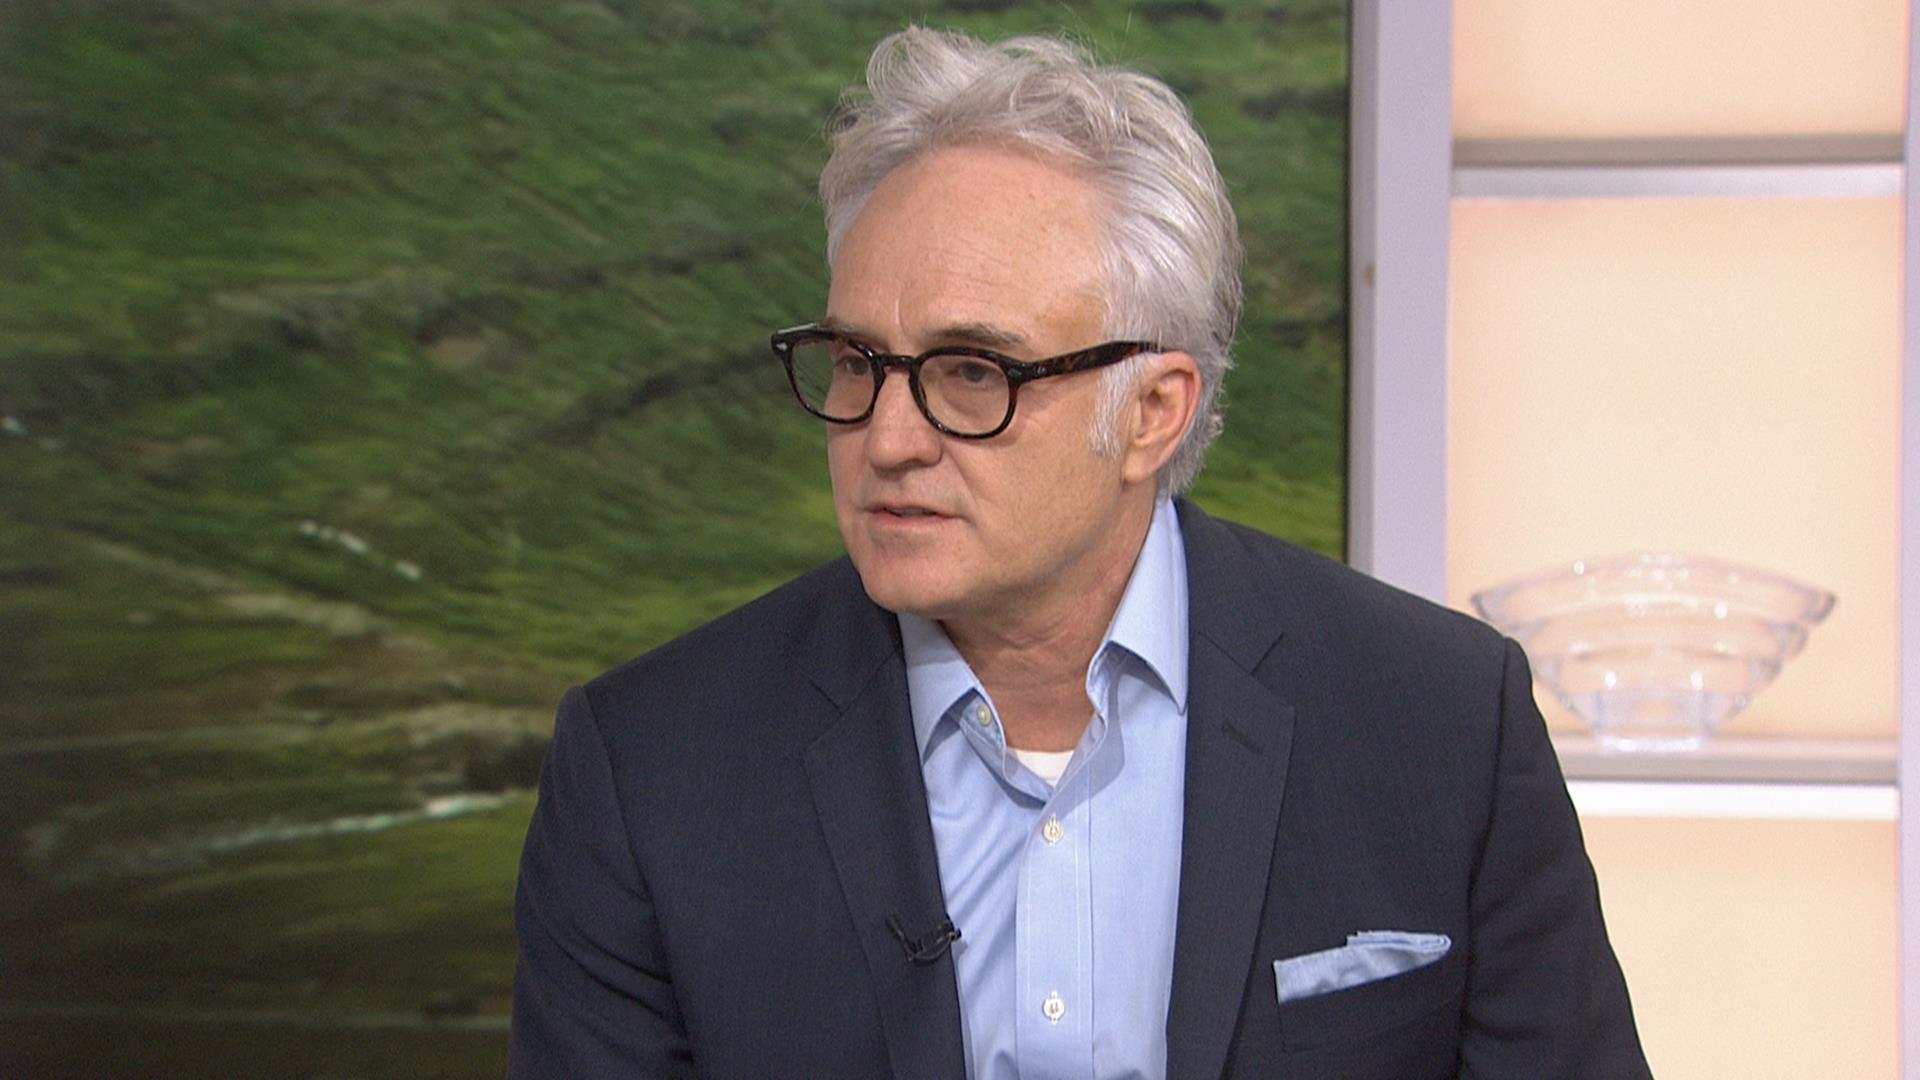 Bradley Whitford talks 'Years of Living Dangerously' and a 'West Wing' reunion